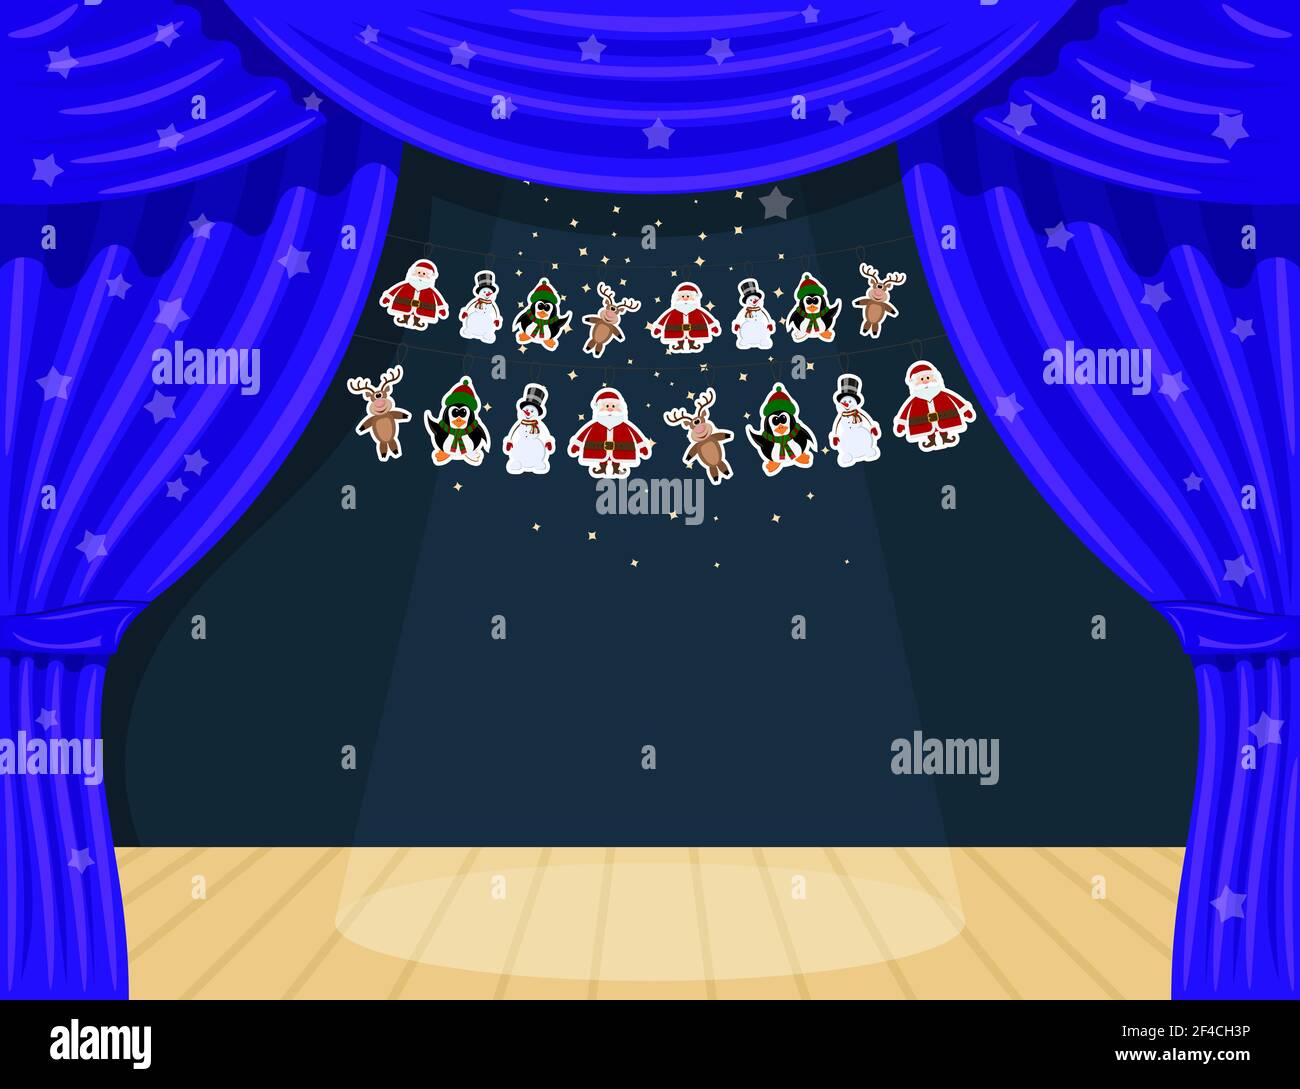 Blue Cartoon theater. Theater curtain with spotlights beam, stars and garlands . Open theater curtain. Blue silk side scenes on stage. Stock vector Stock Vector